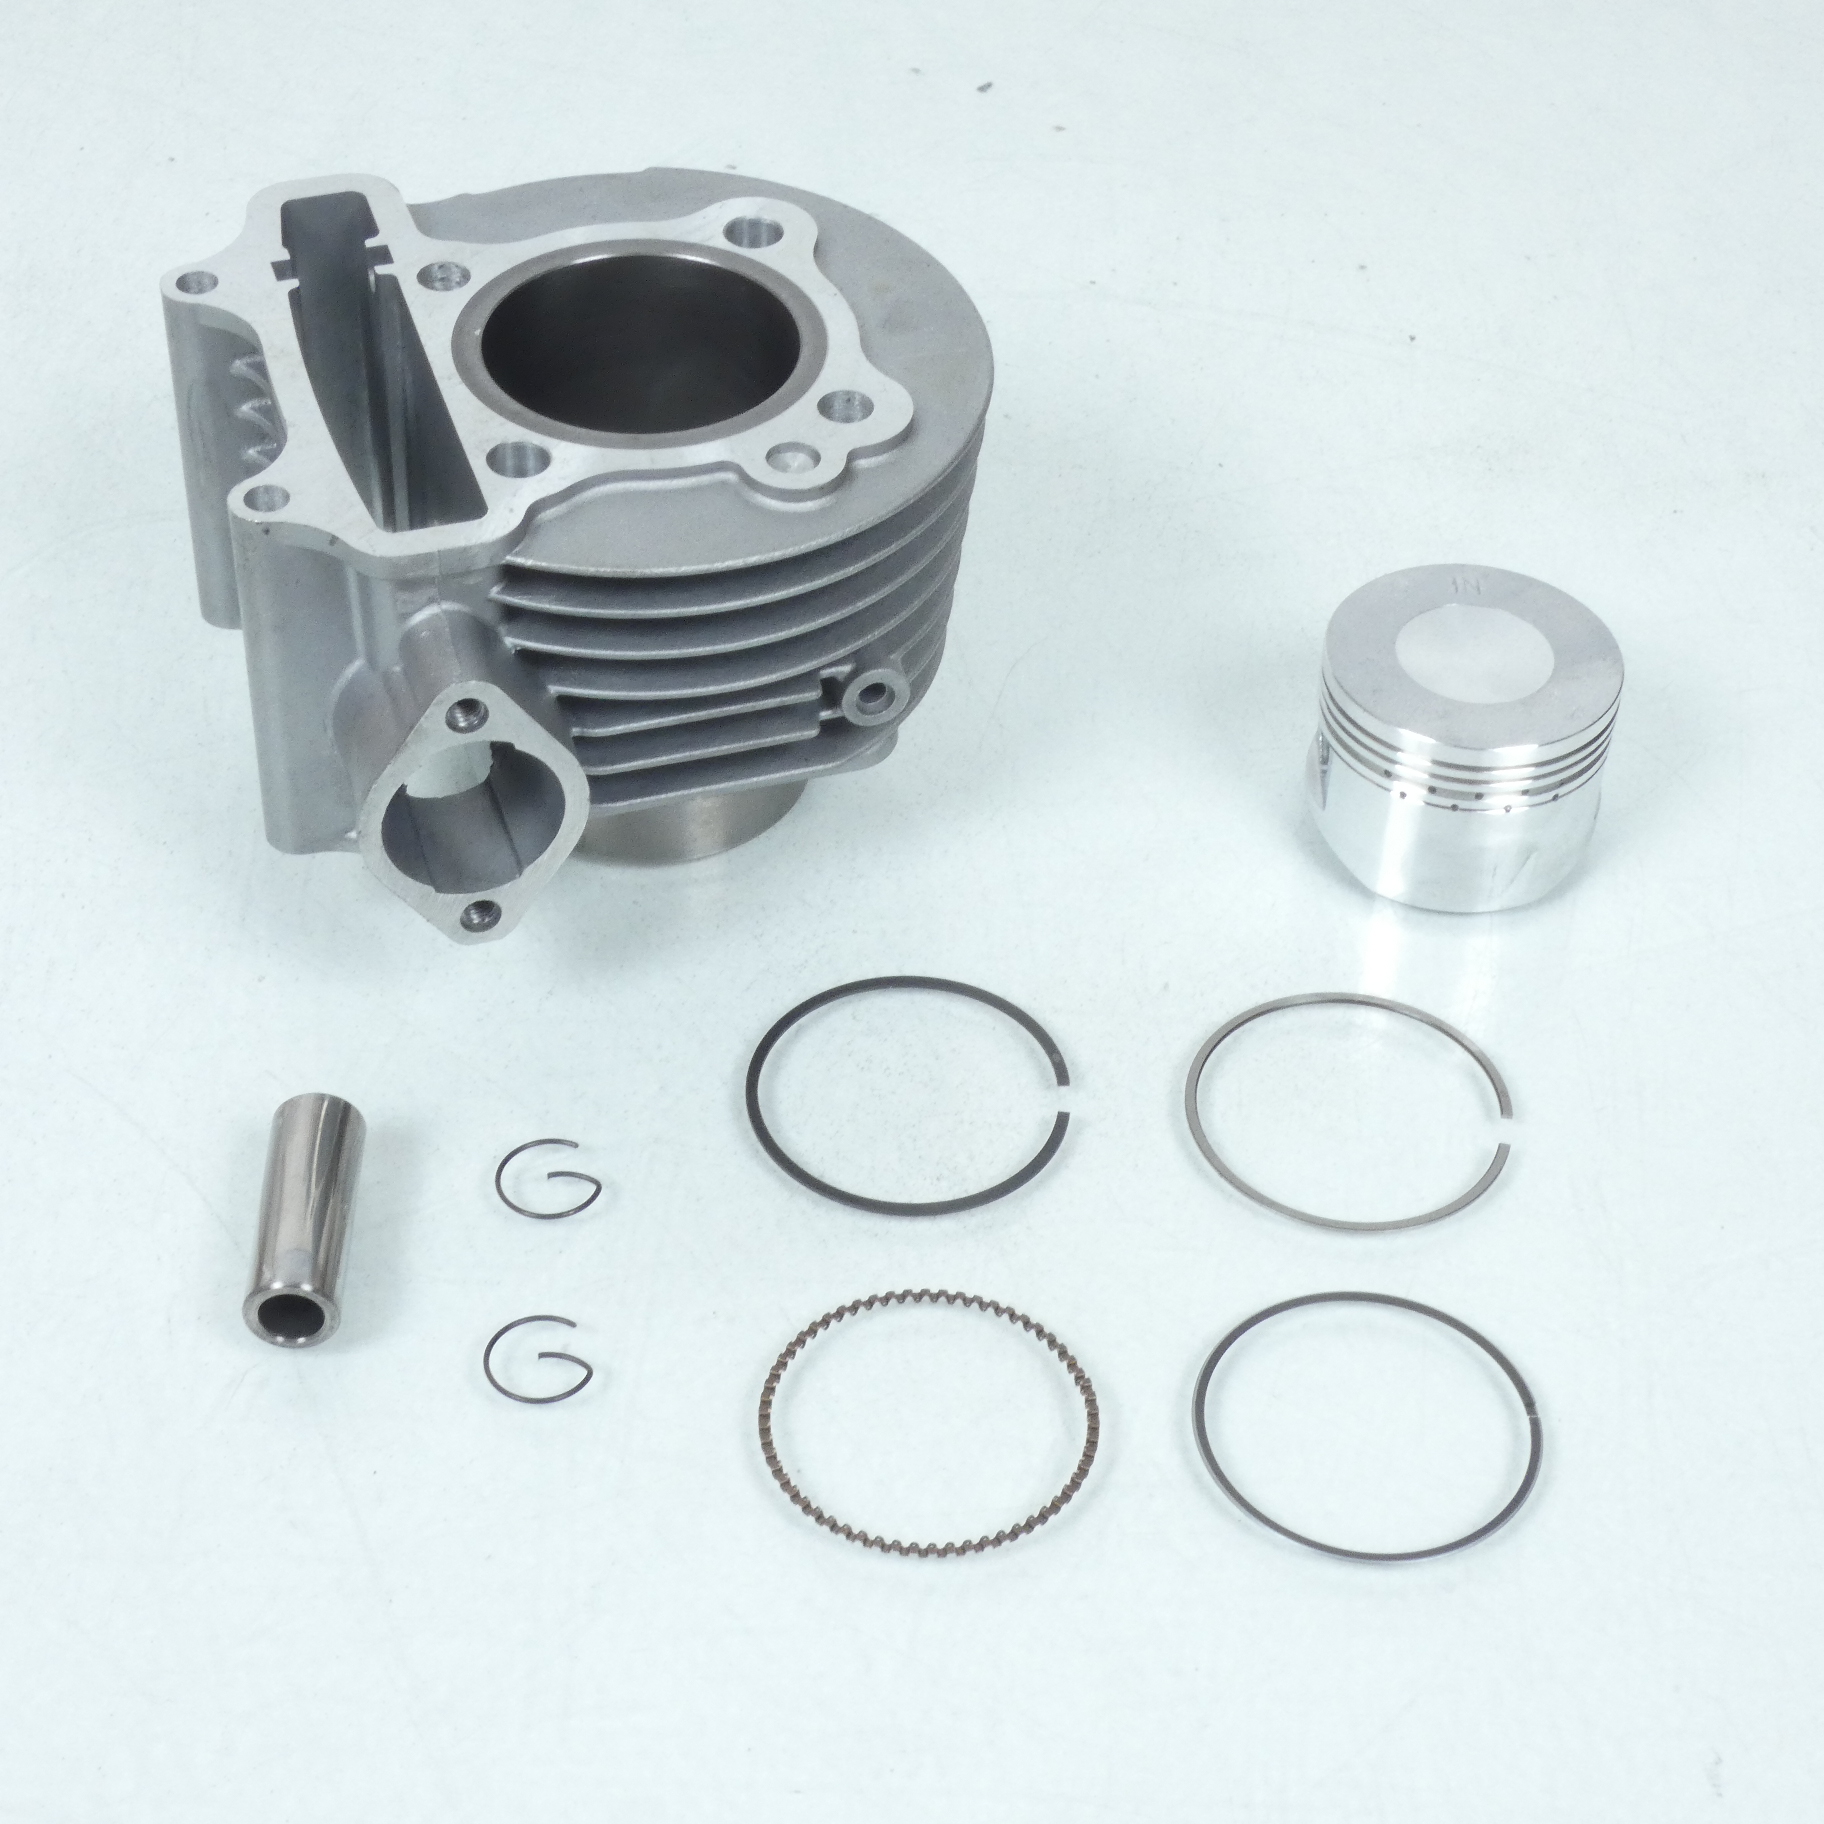 Kit Cylindre piston Ø51.8mm Sifam pour scooter Chinois 125 GY6 Axe Ø15mm Neuf